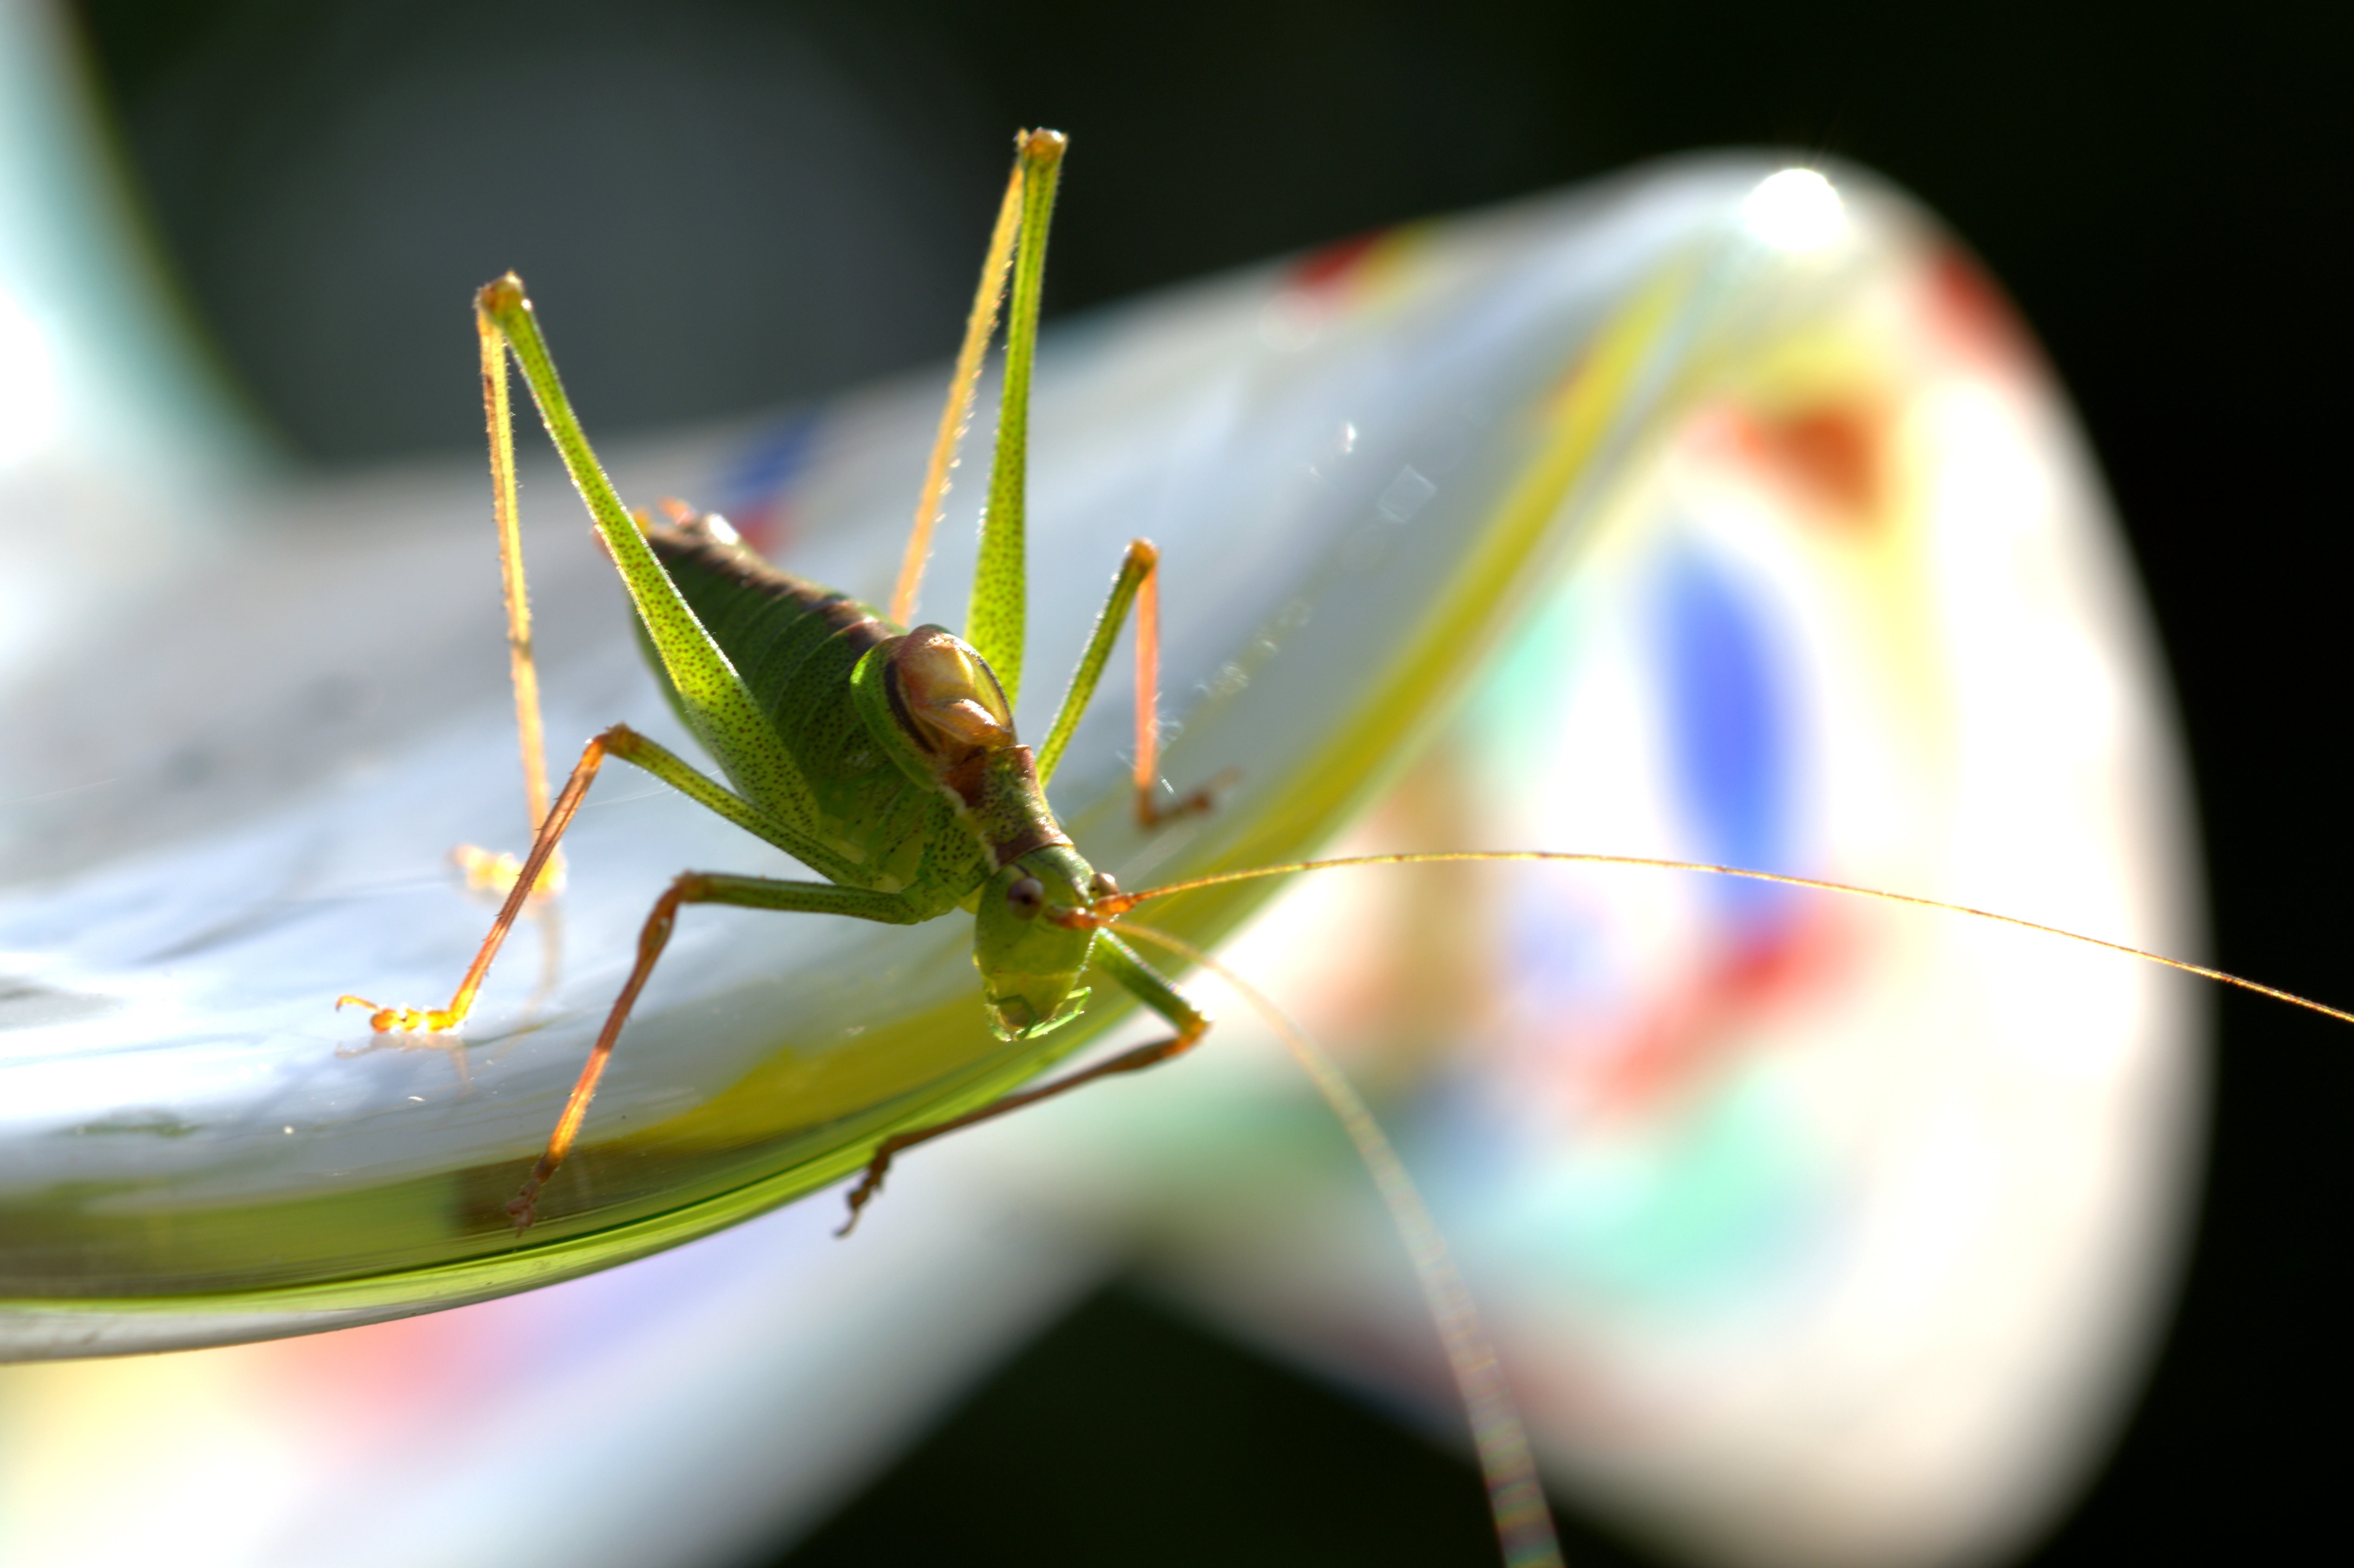 Nature, Close, Grasshopper, Green, animal themes, insect